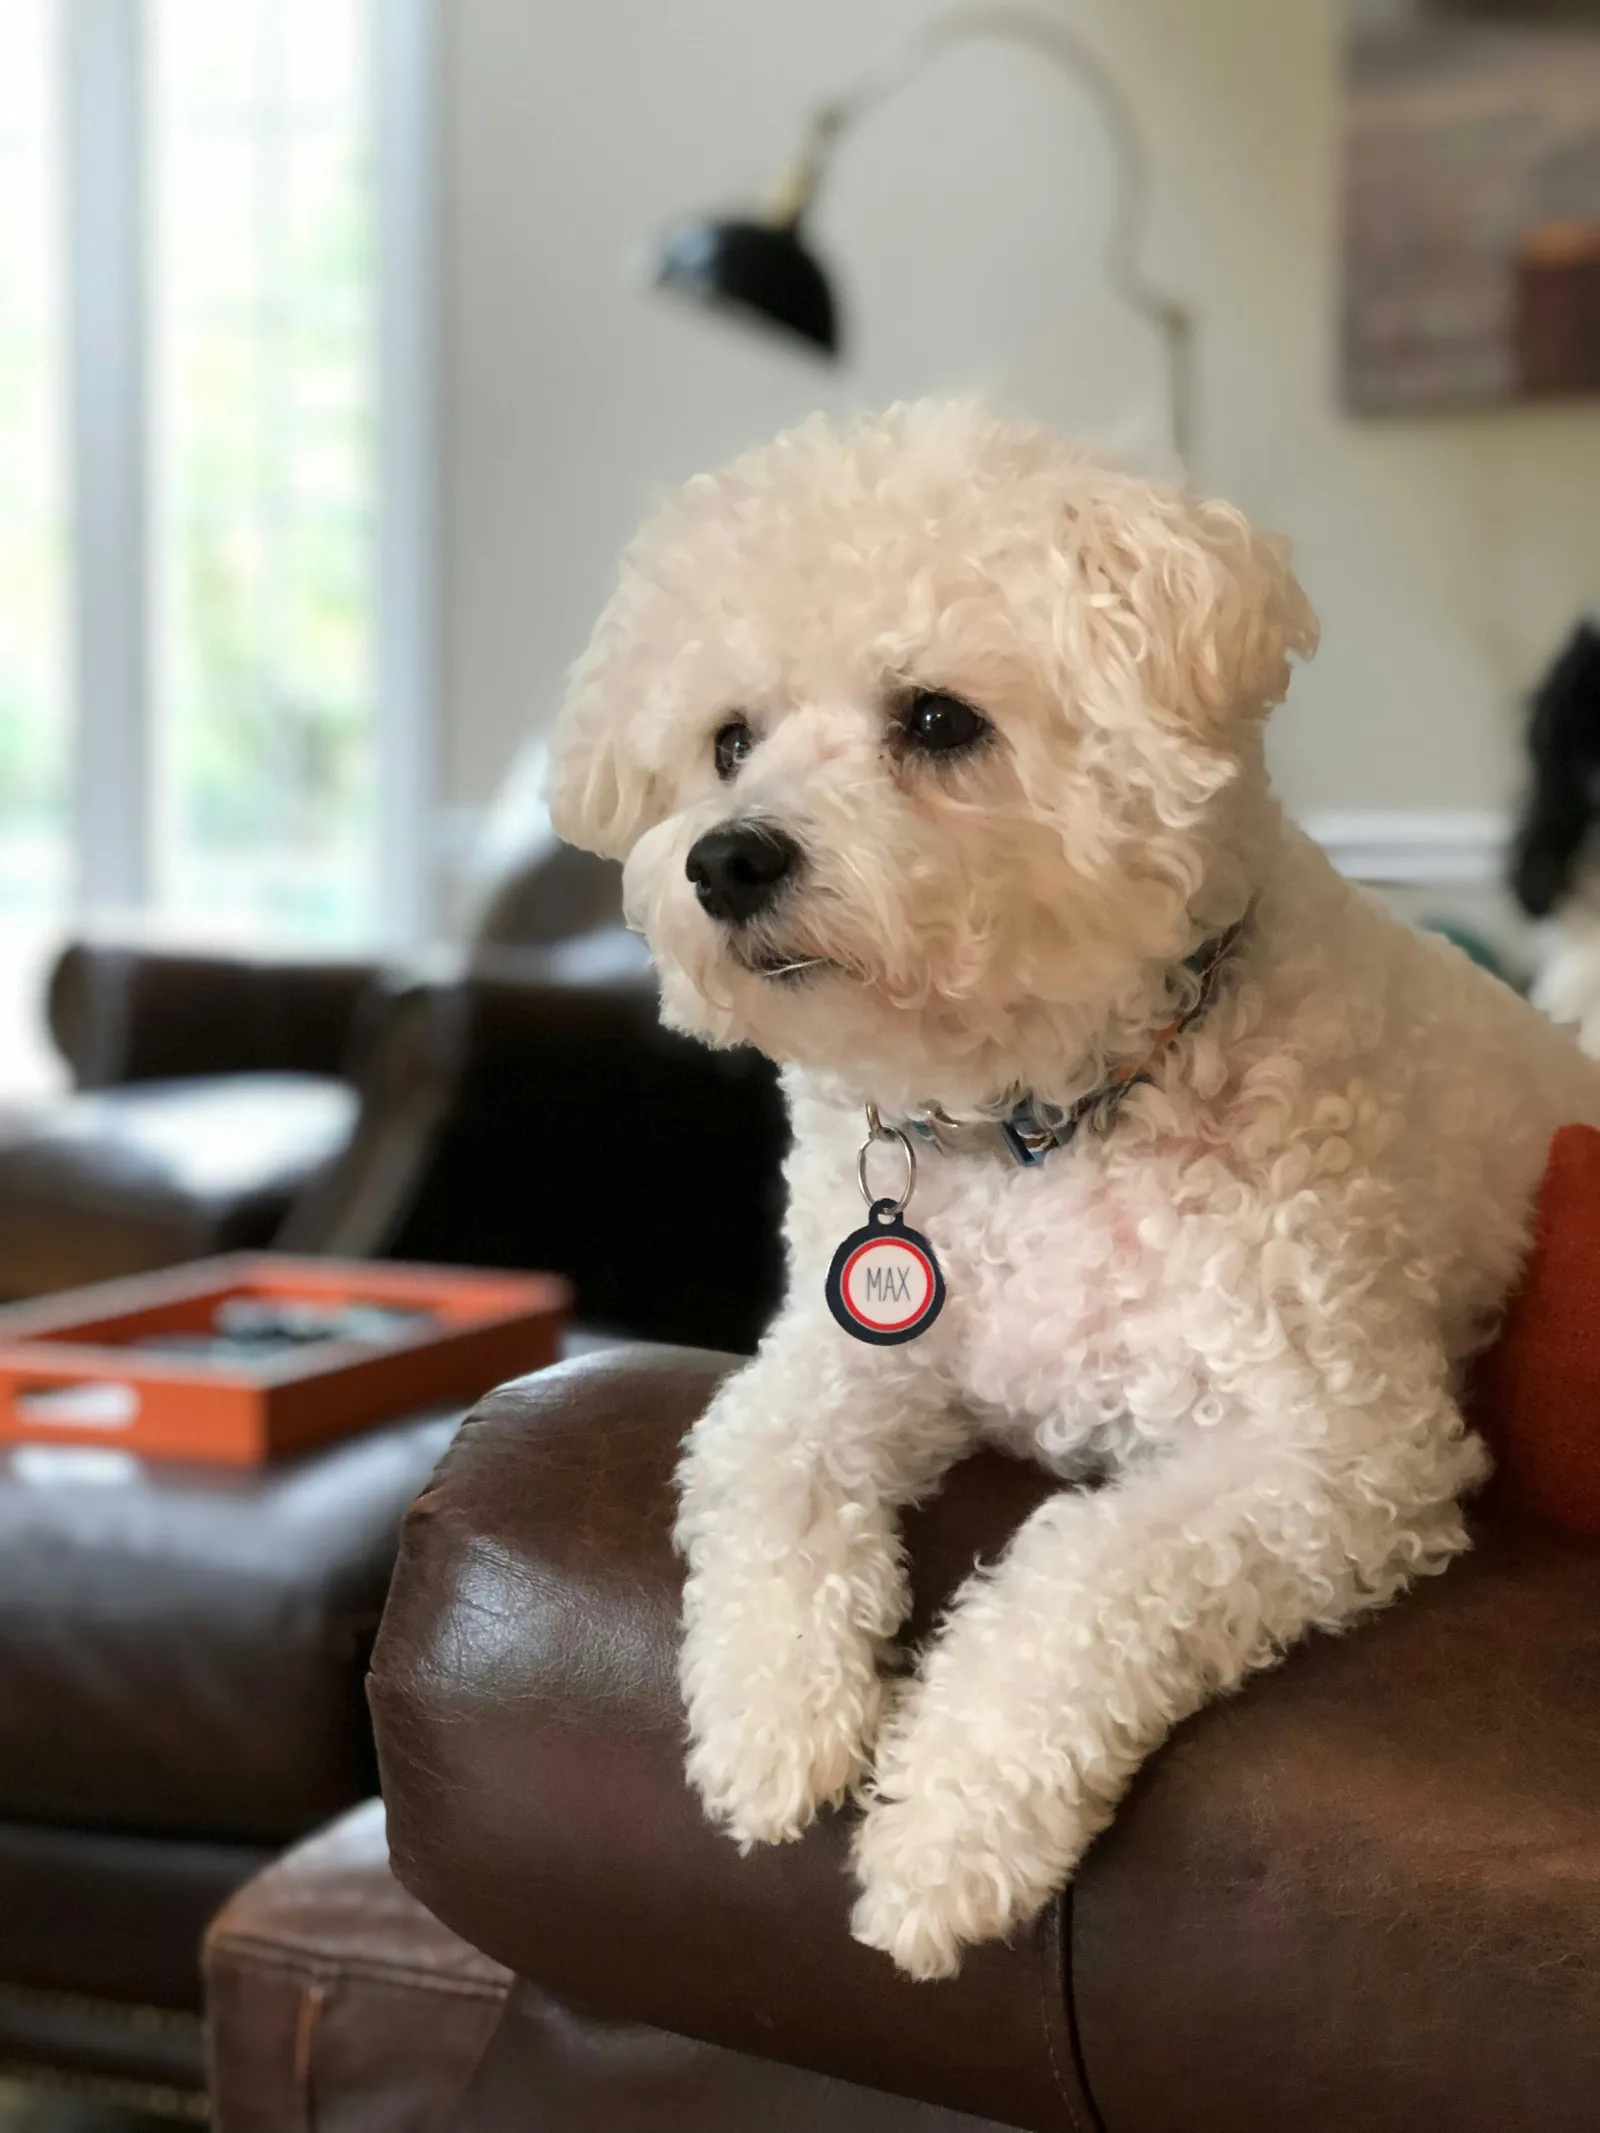 Bichon dog resting on the side of a couch in a living room